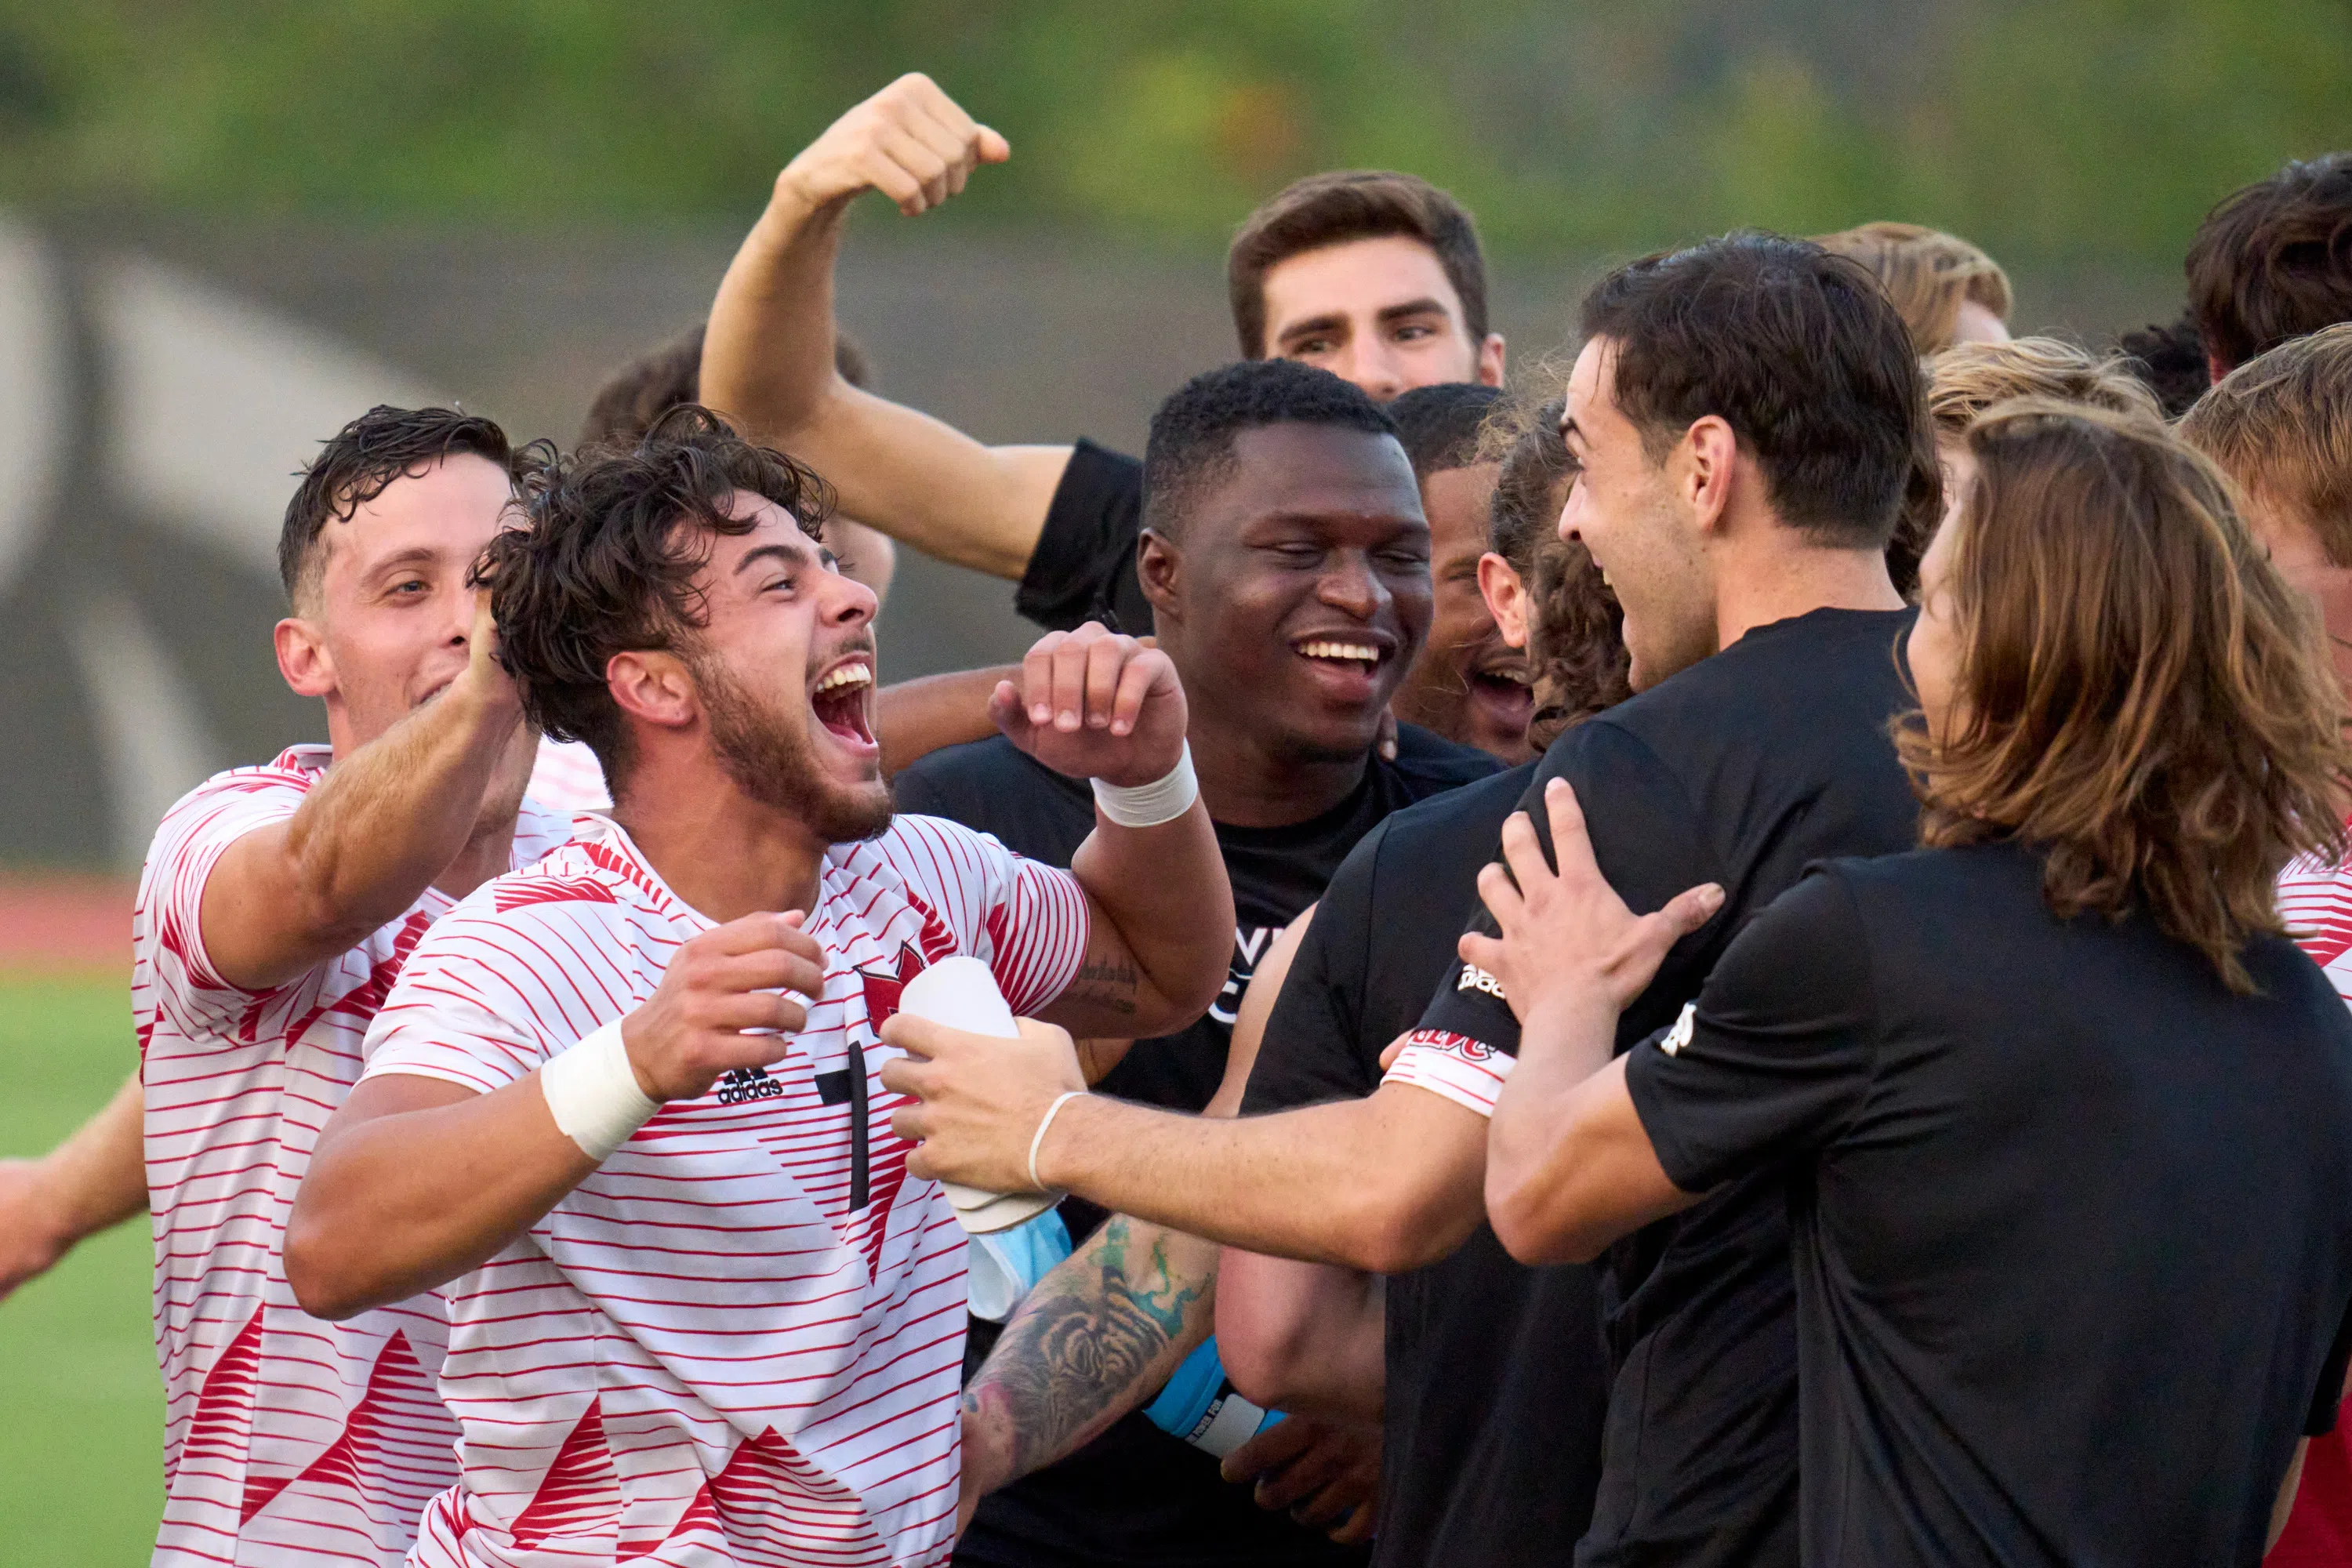 The men's soccer team celebrates a win on the field.